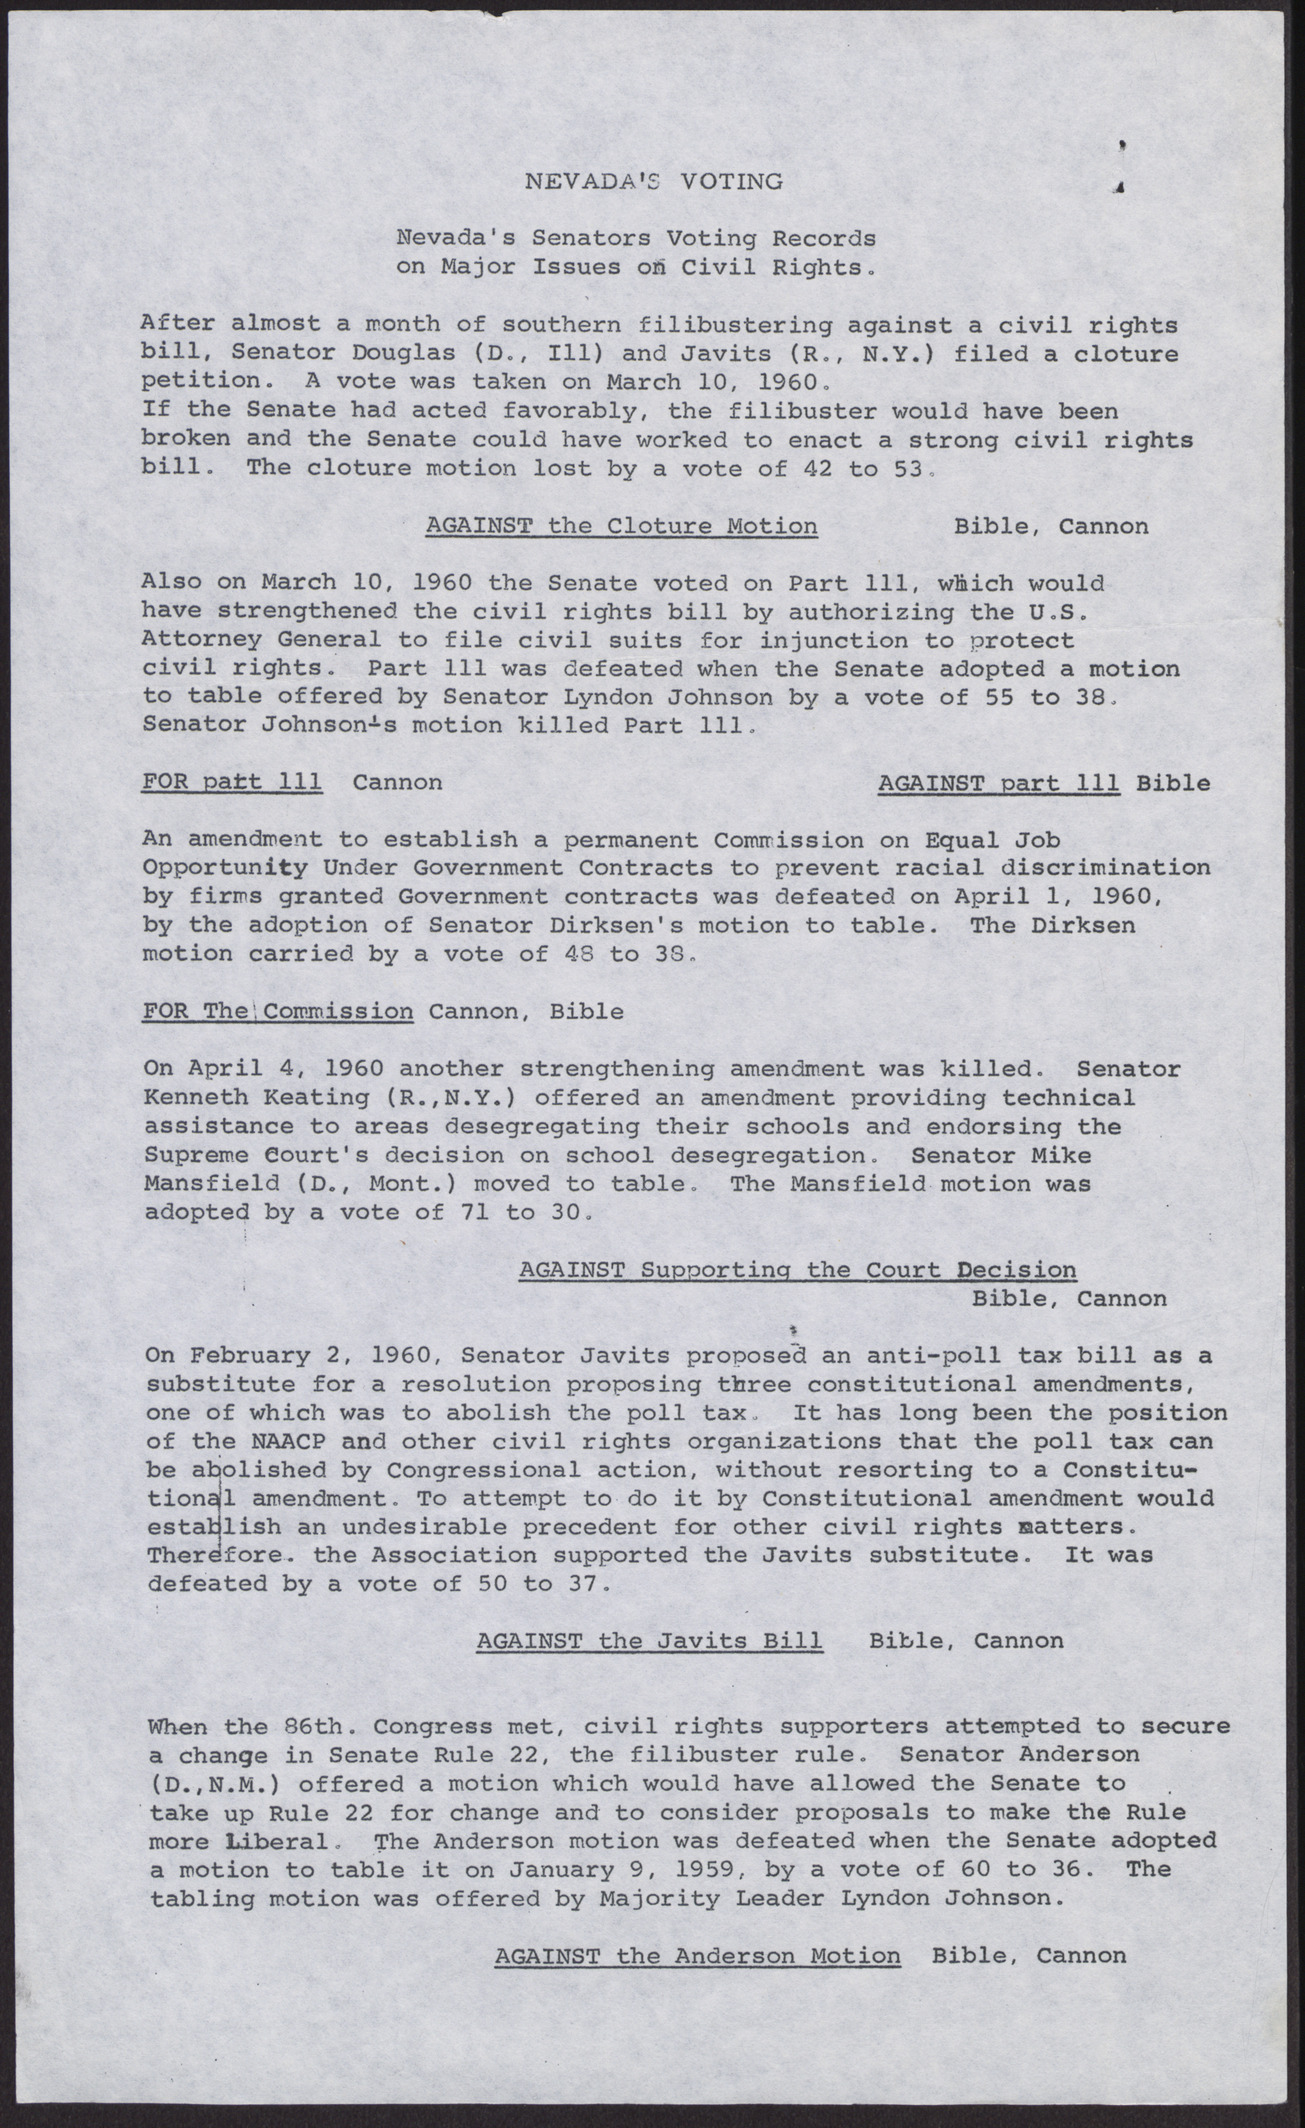 Summary of Nevada's Senators Voting Records on Major Issues on Civil Rights (2 pages) and an NAACP progress report (1 page), June 22, 1960